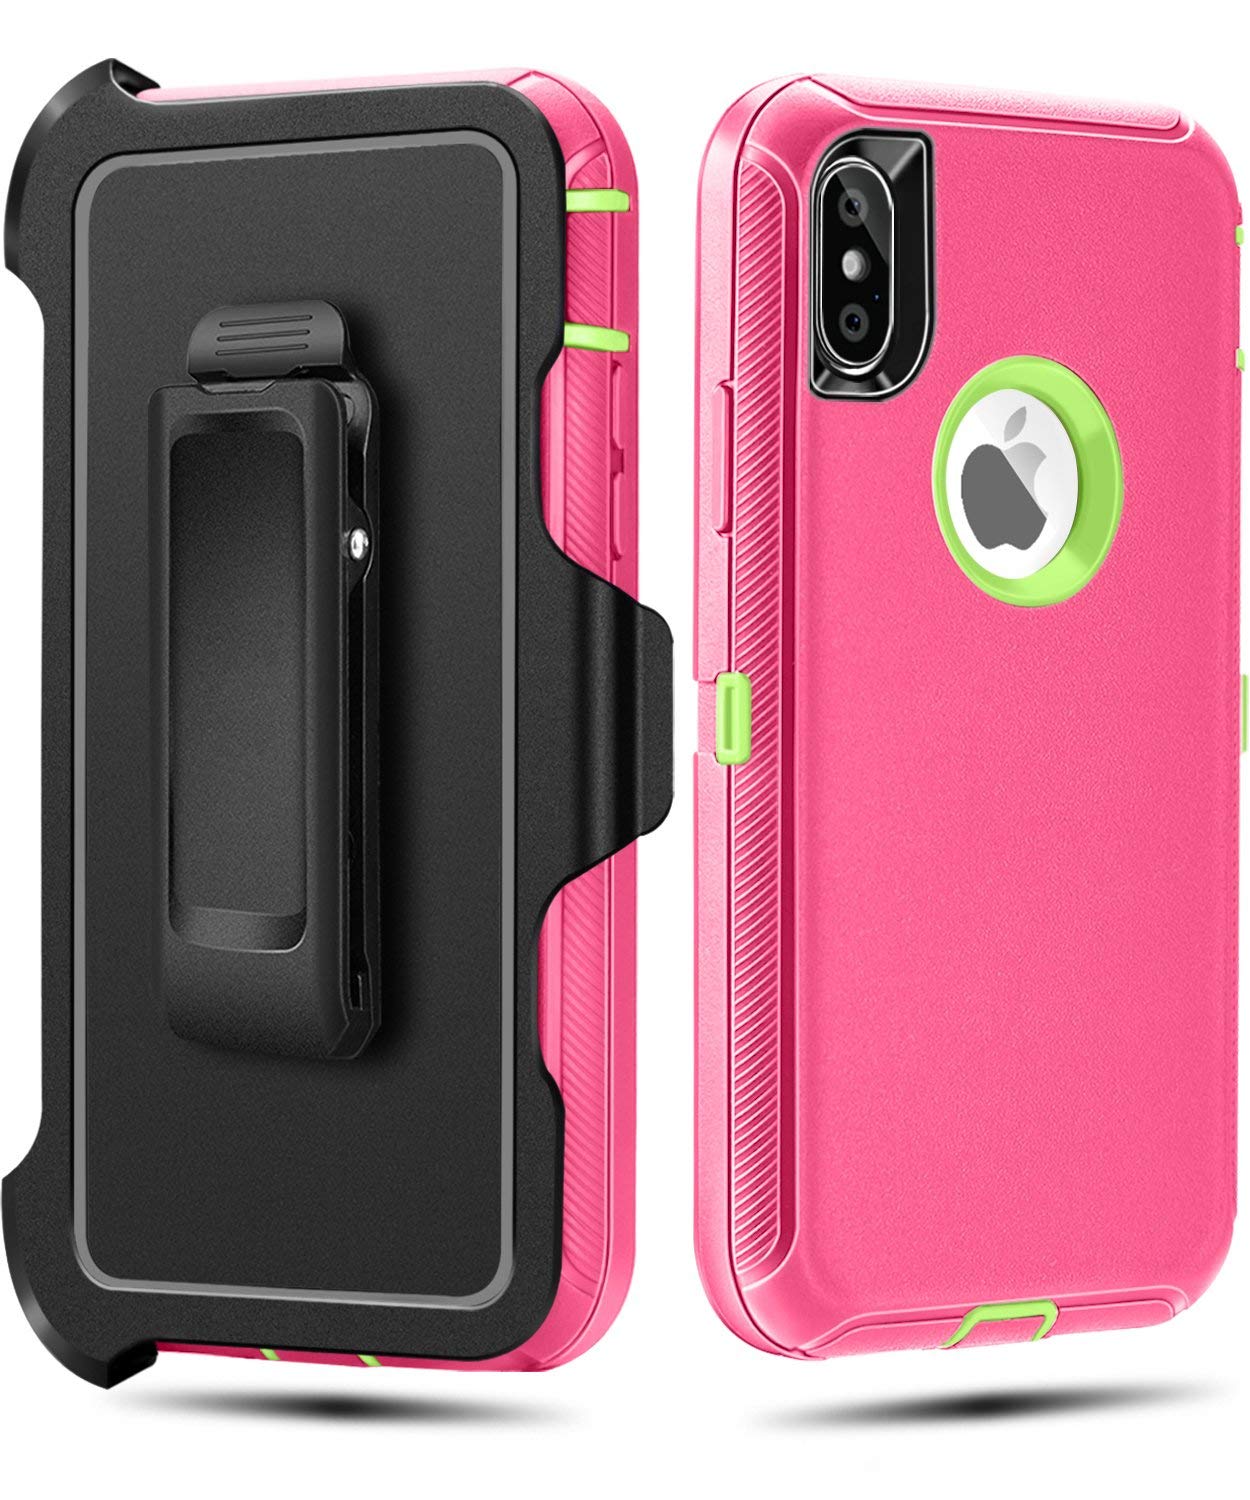 iPhone XS,iPhone X Case,FOGEEK Belt Clip Holster Heavy Duty Kickstand Cover [Support Wireless Charging] [Dust-Proof] [Shockproof] Compatible for Apple iPhone XS, iPhone X, 5.8 inch (Rose and Green)